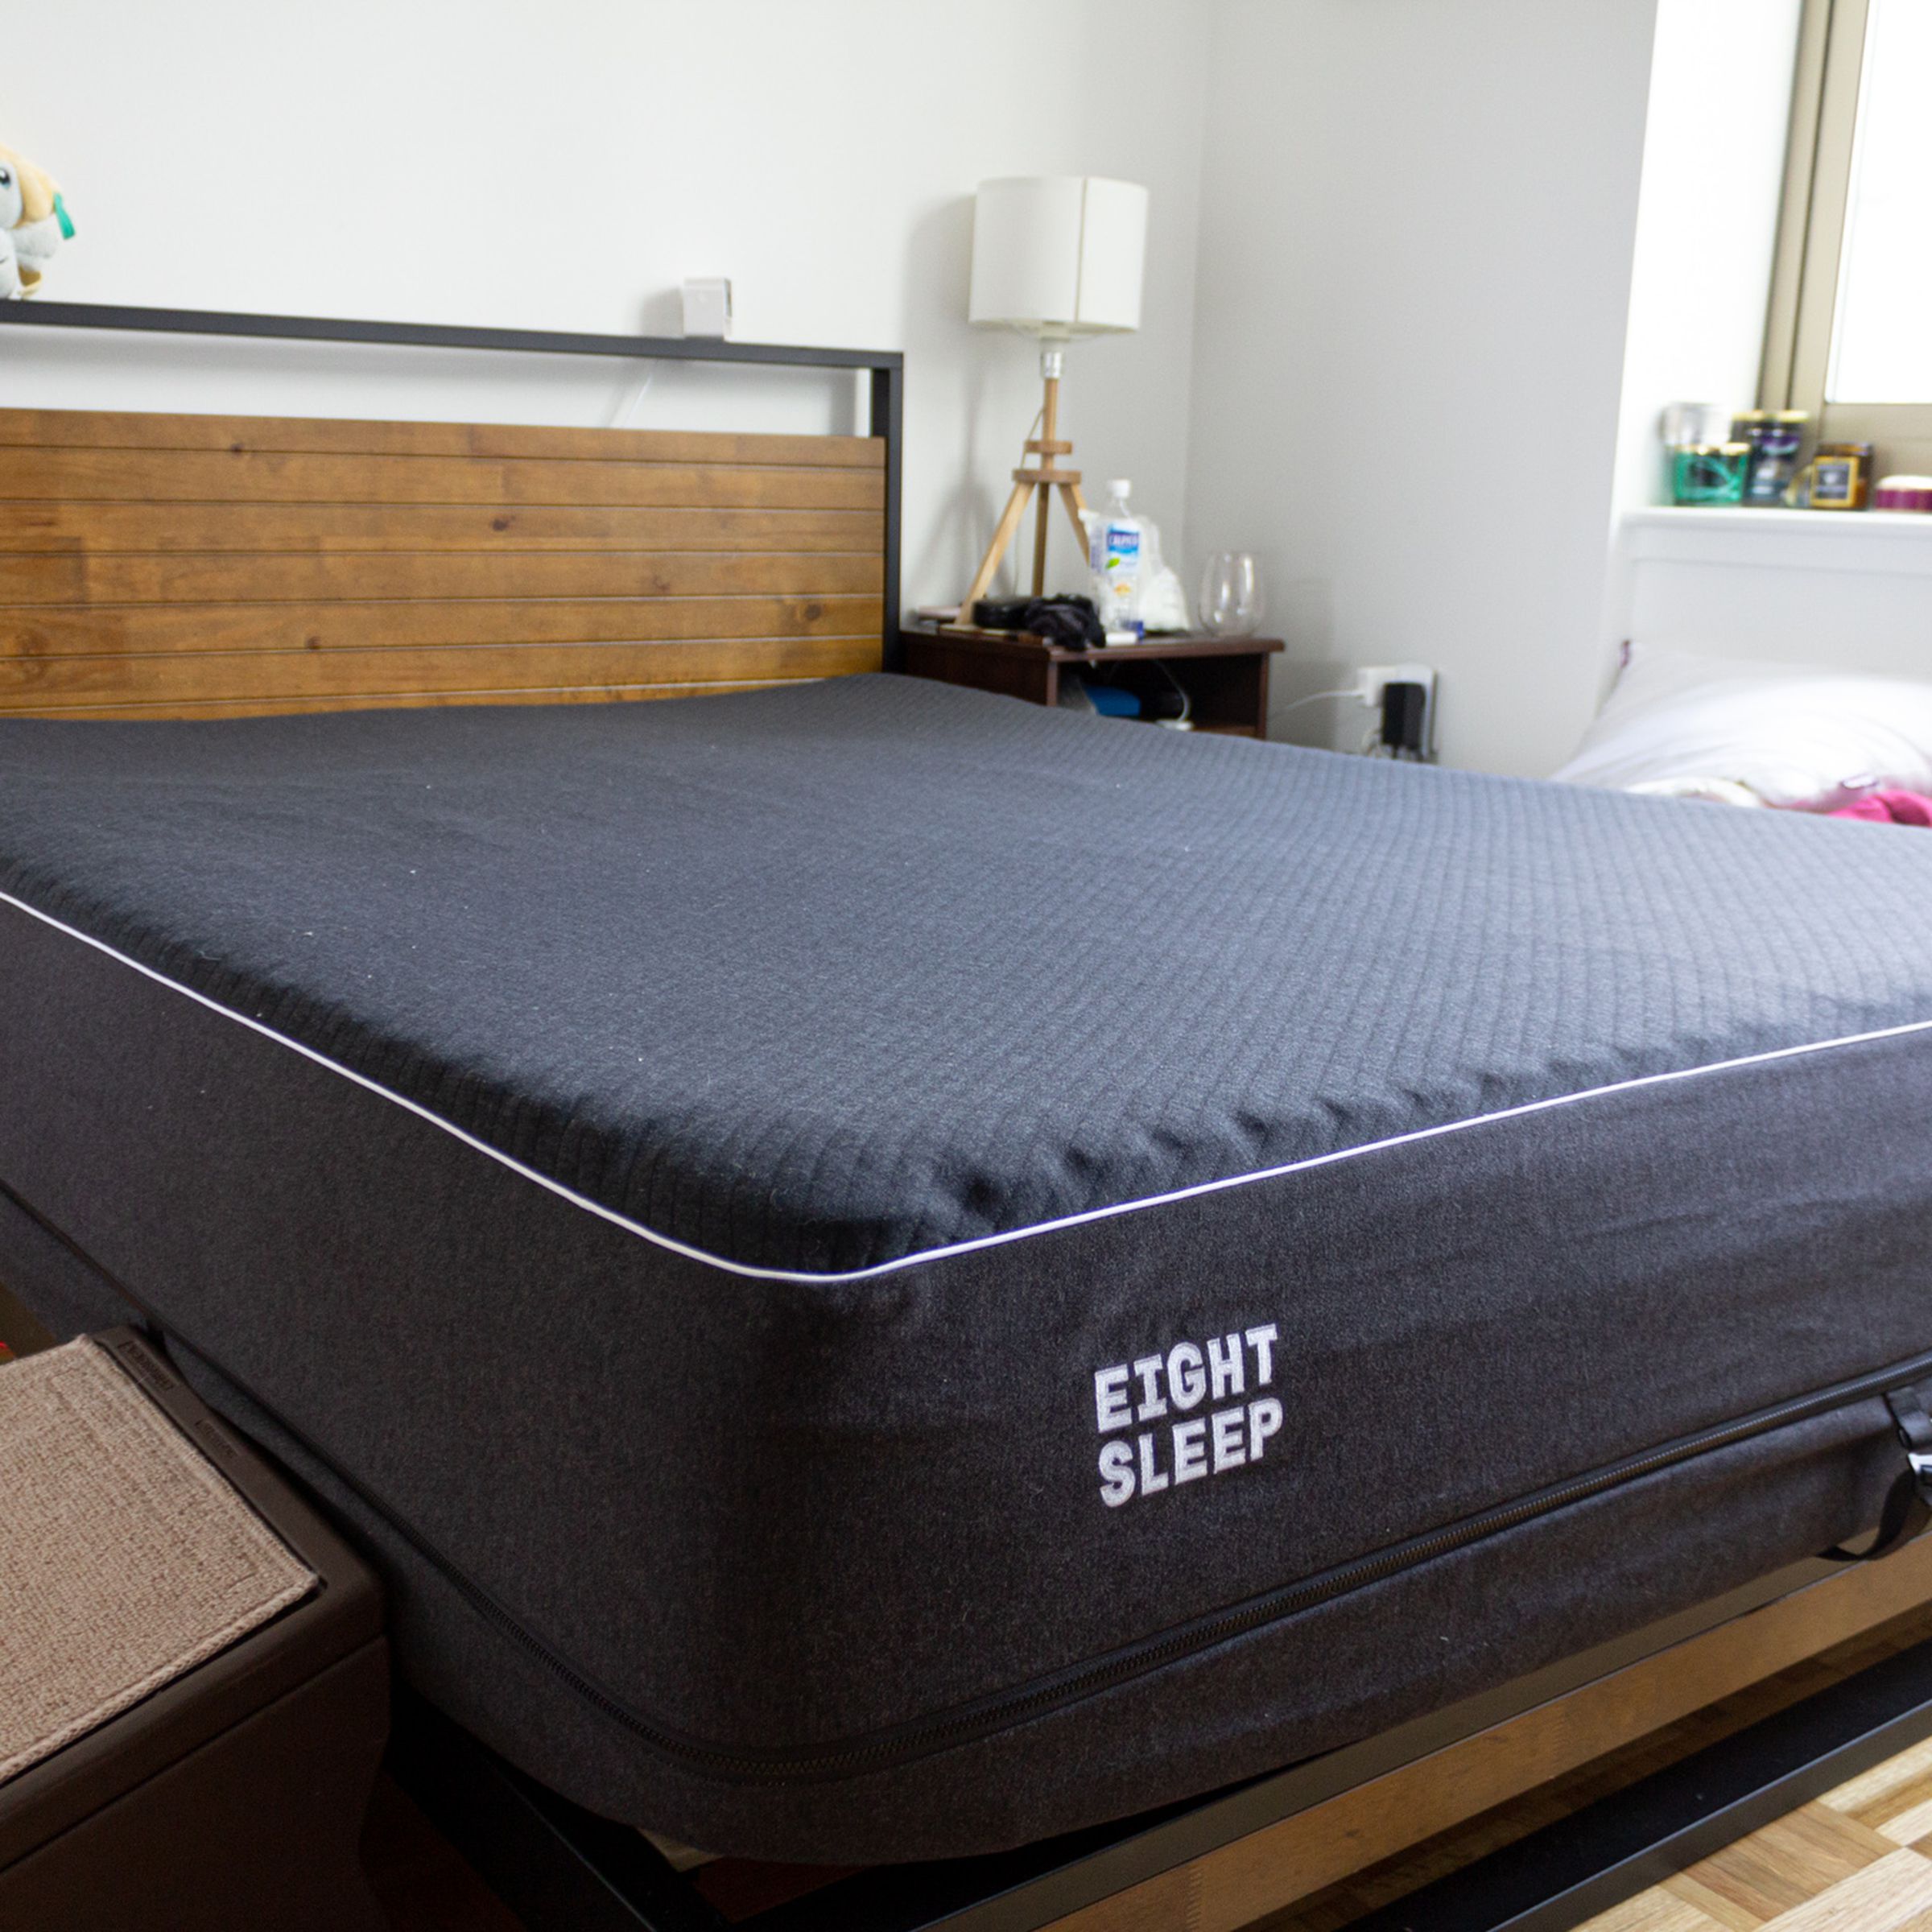 The Eight Sleep Pod 2 Pro Cover installed on a mattress.